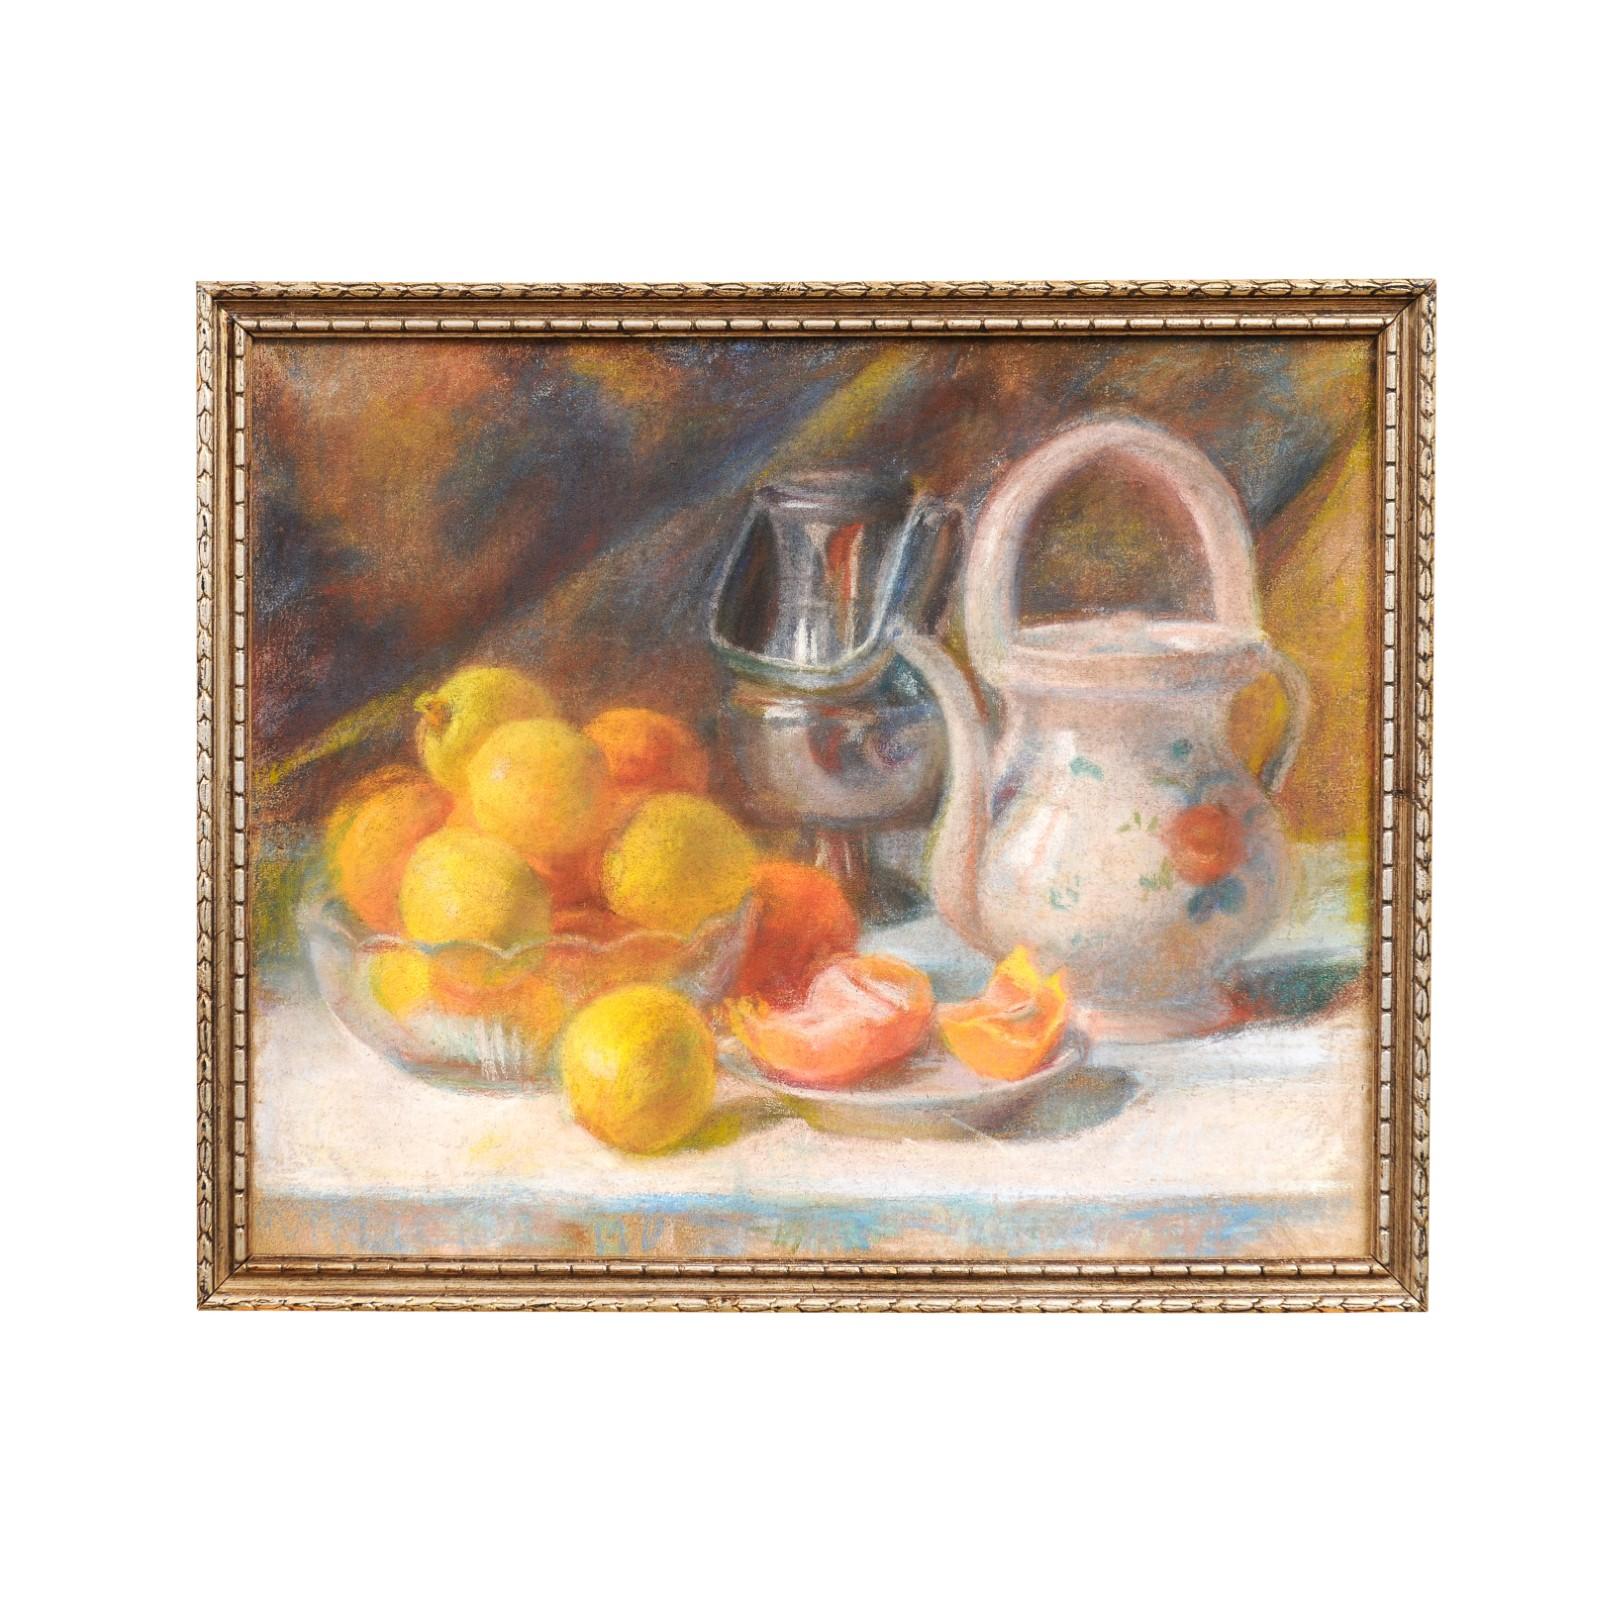 A French still-life pastel on canvas painting from the 19th century depicting citrus in a bowl, a jug and a silver container. Transport yourself to the bountiful still-life world of 19th-century France with this captivating French pastel on canvas